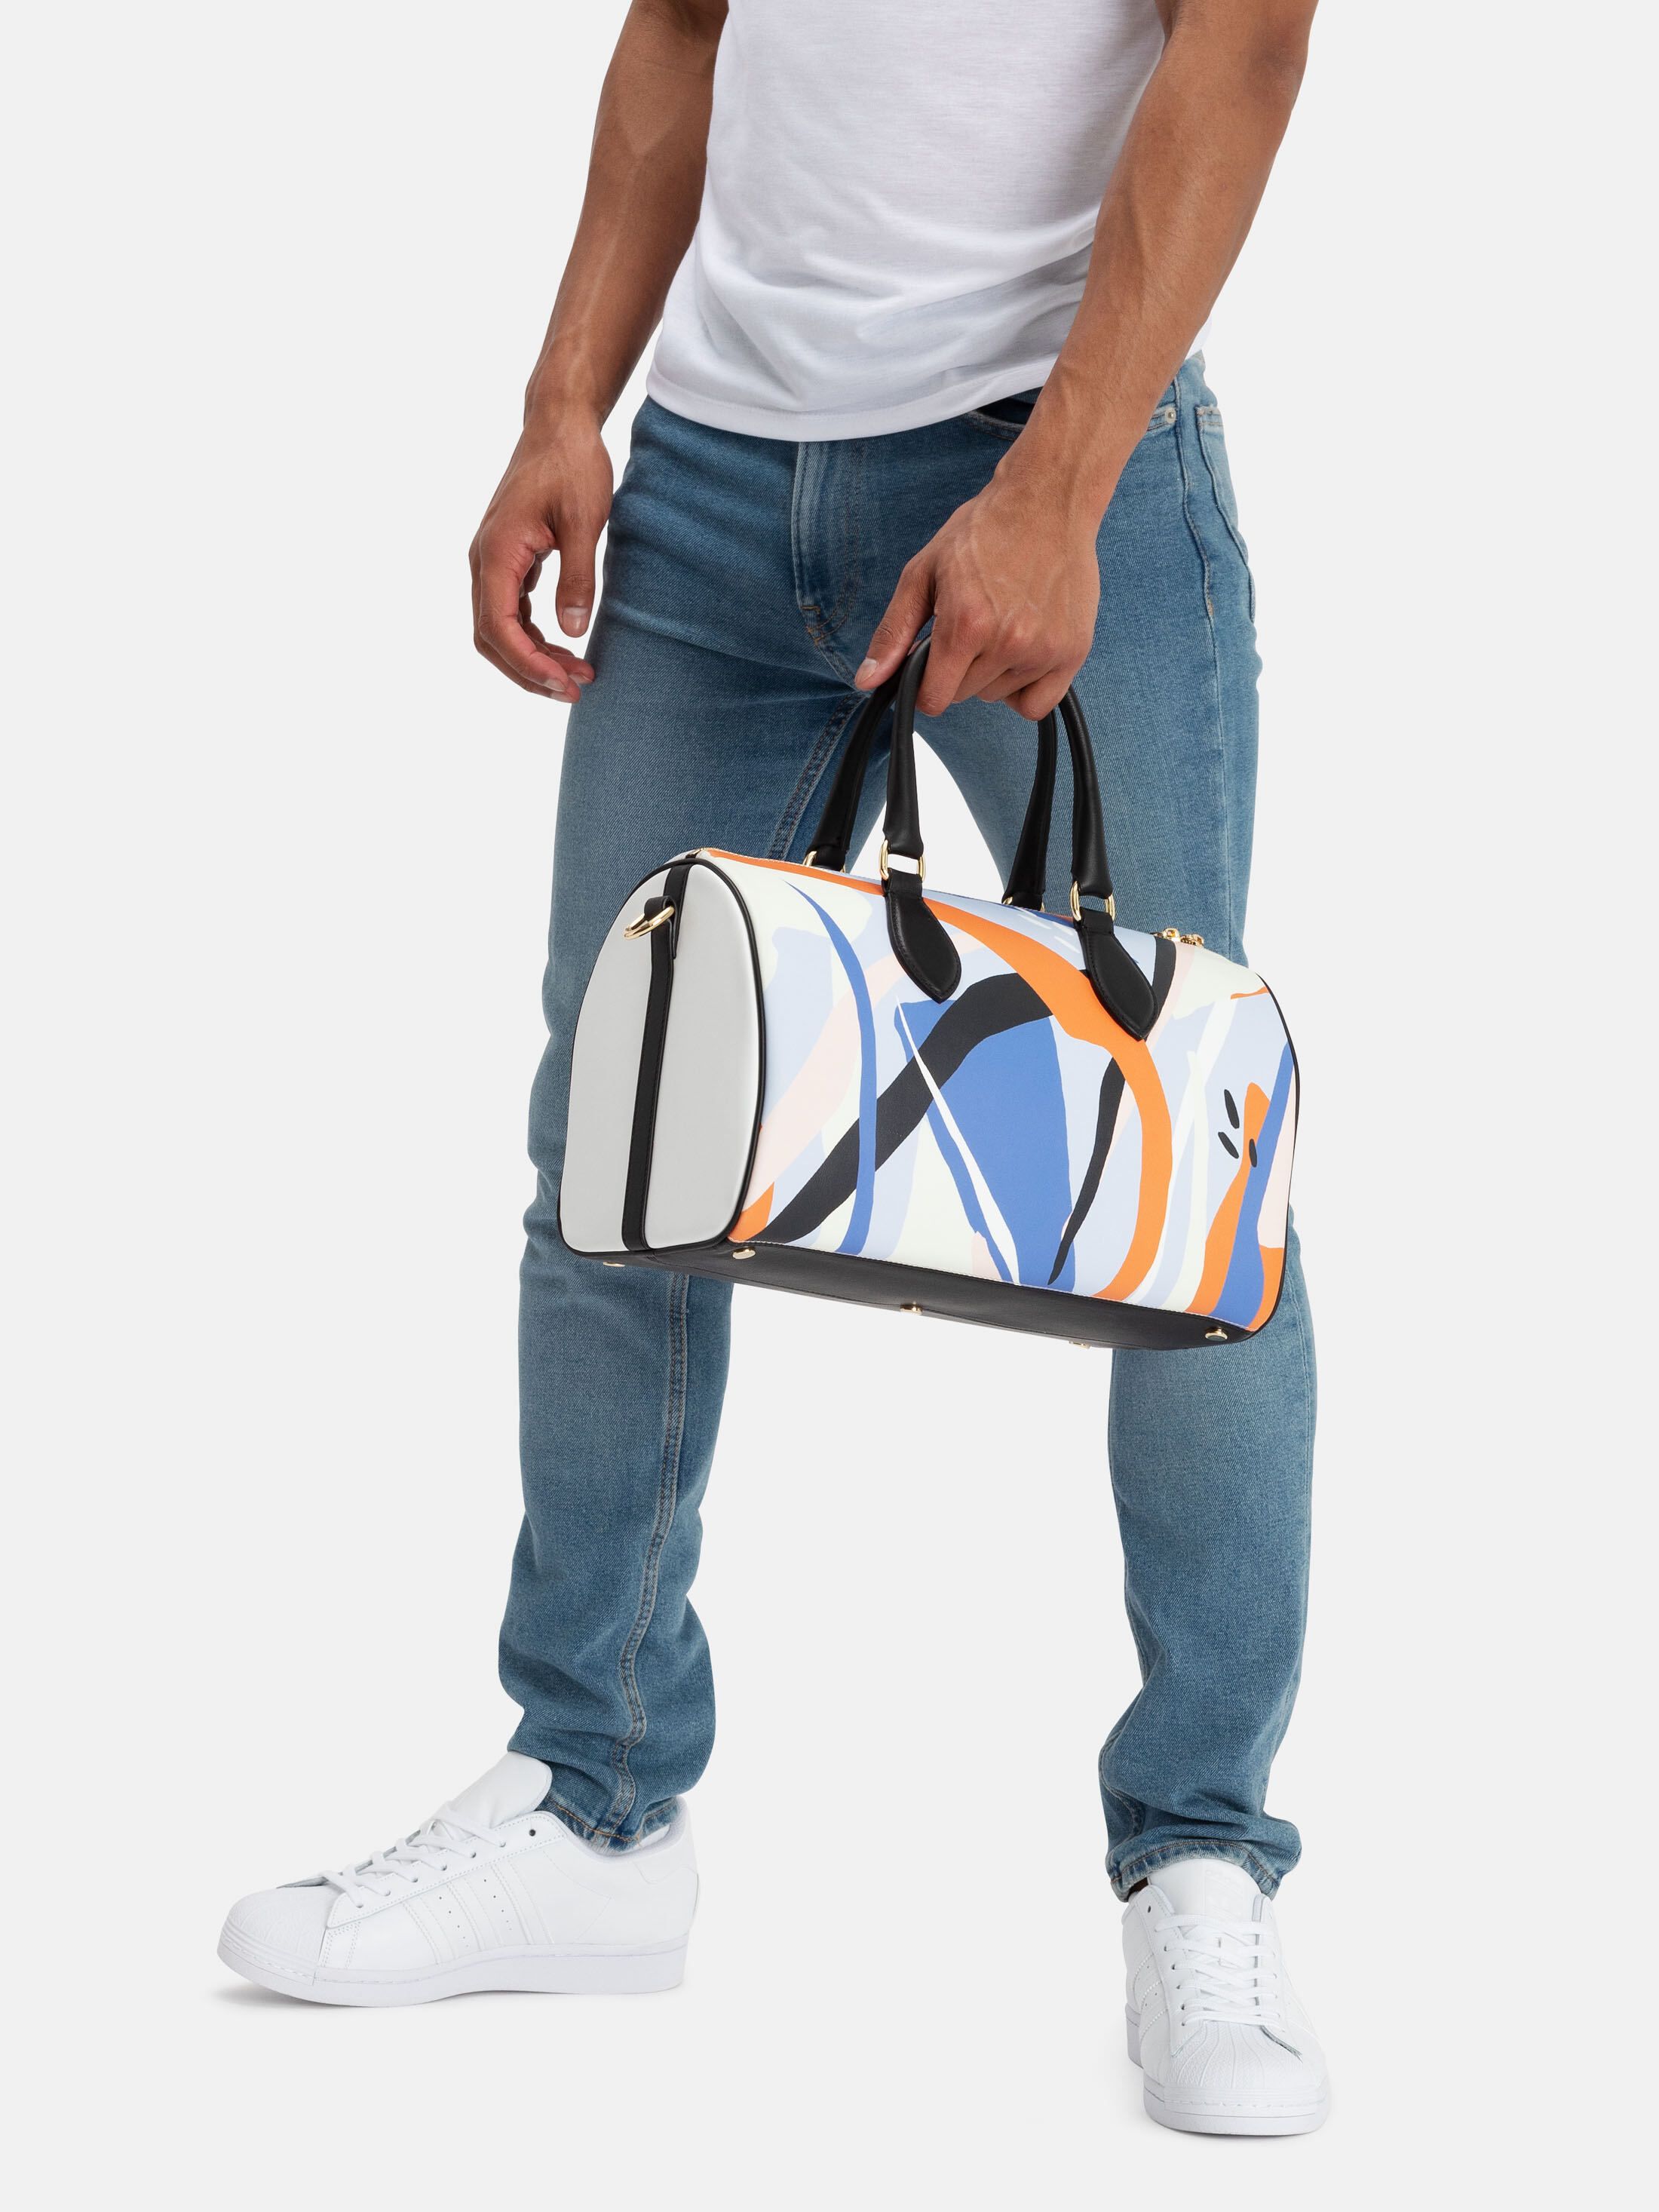 Design your own duffle bags